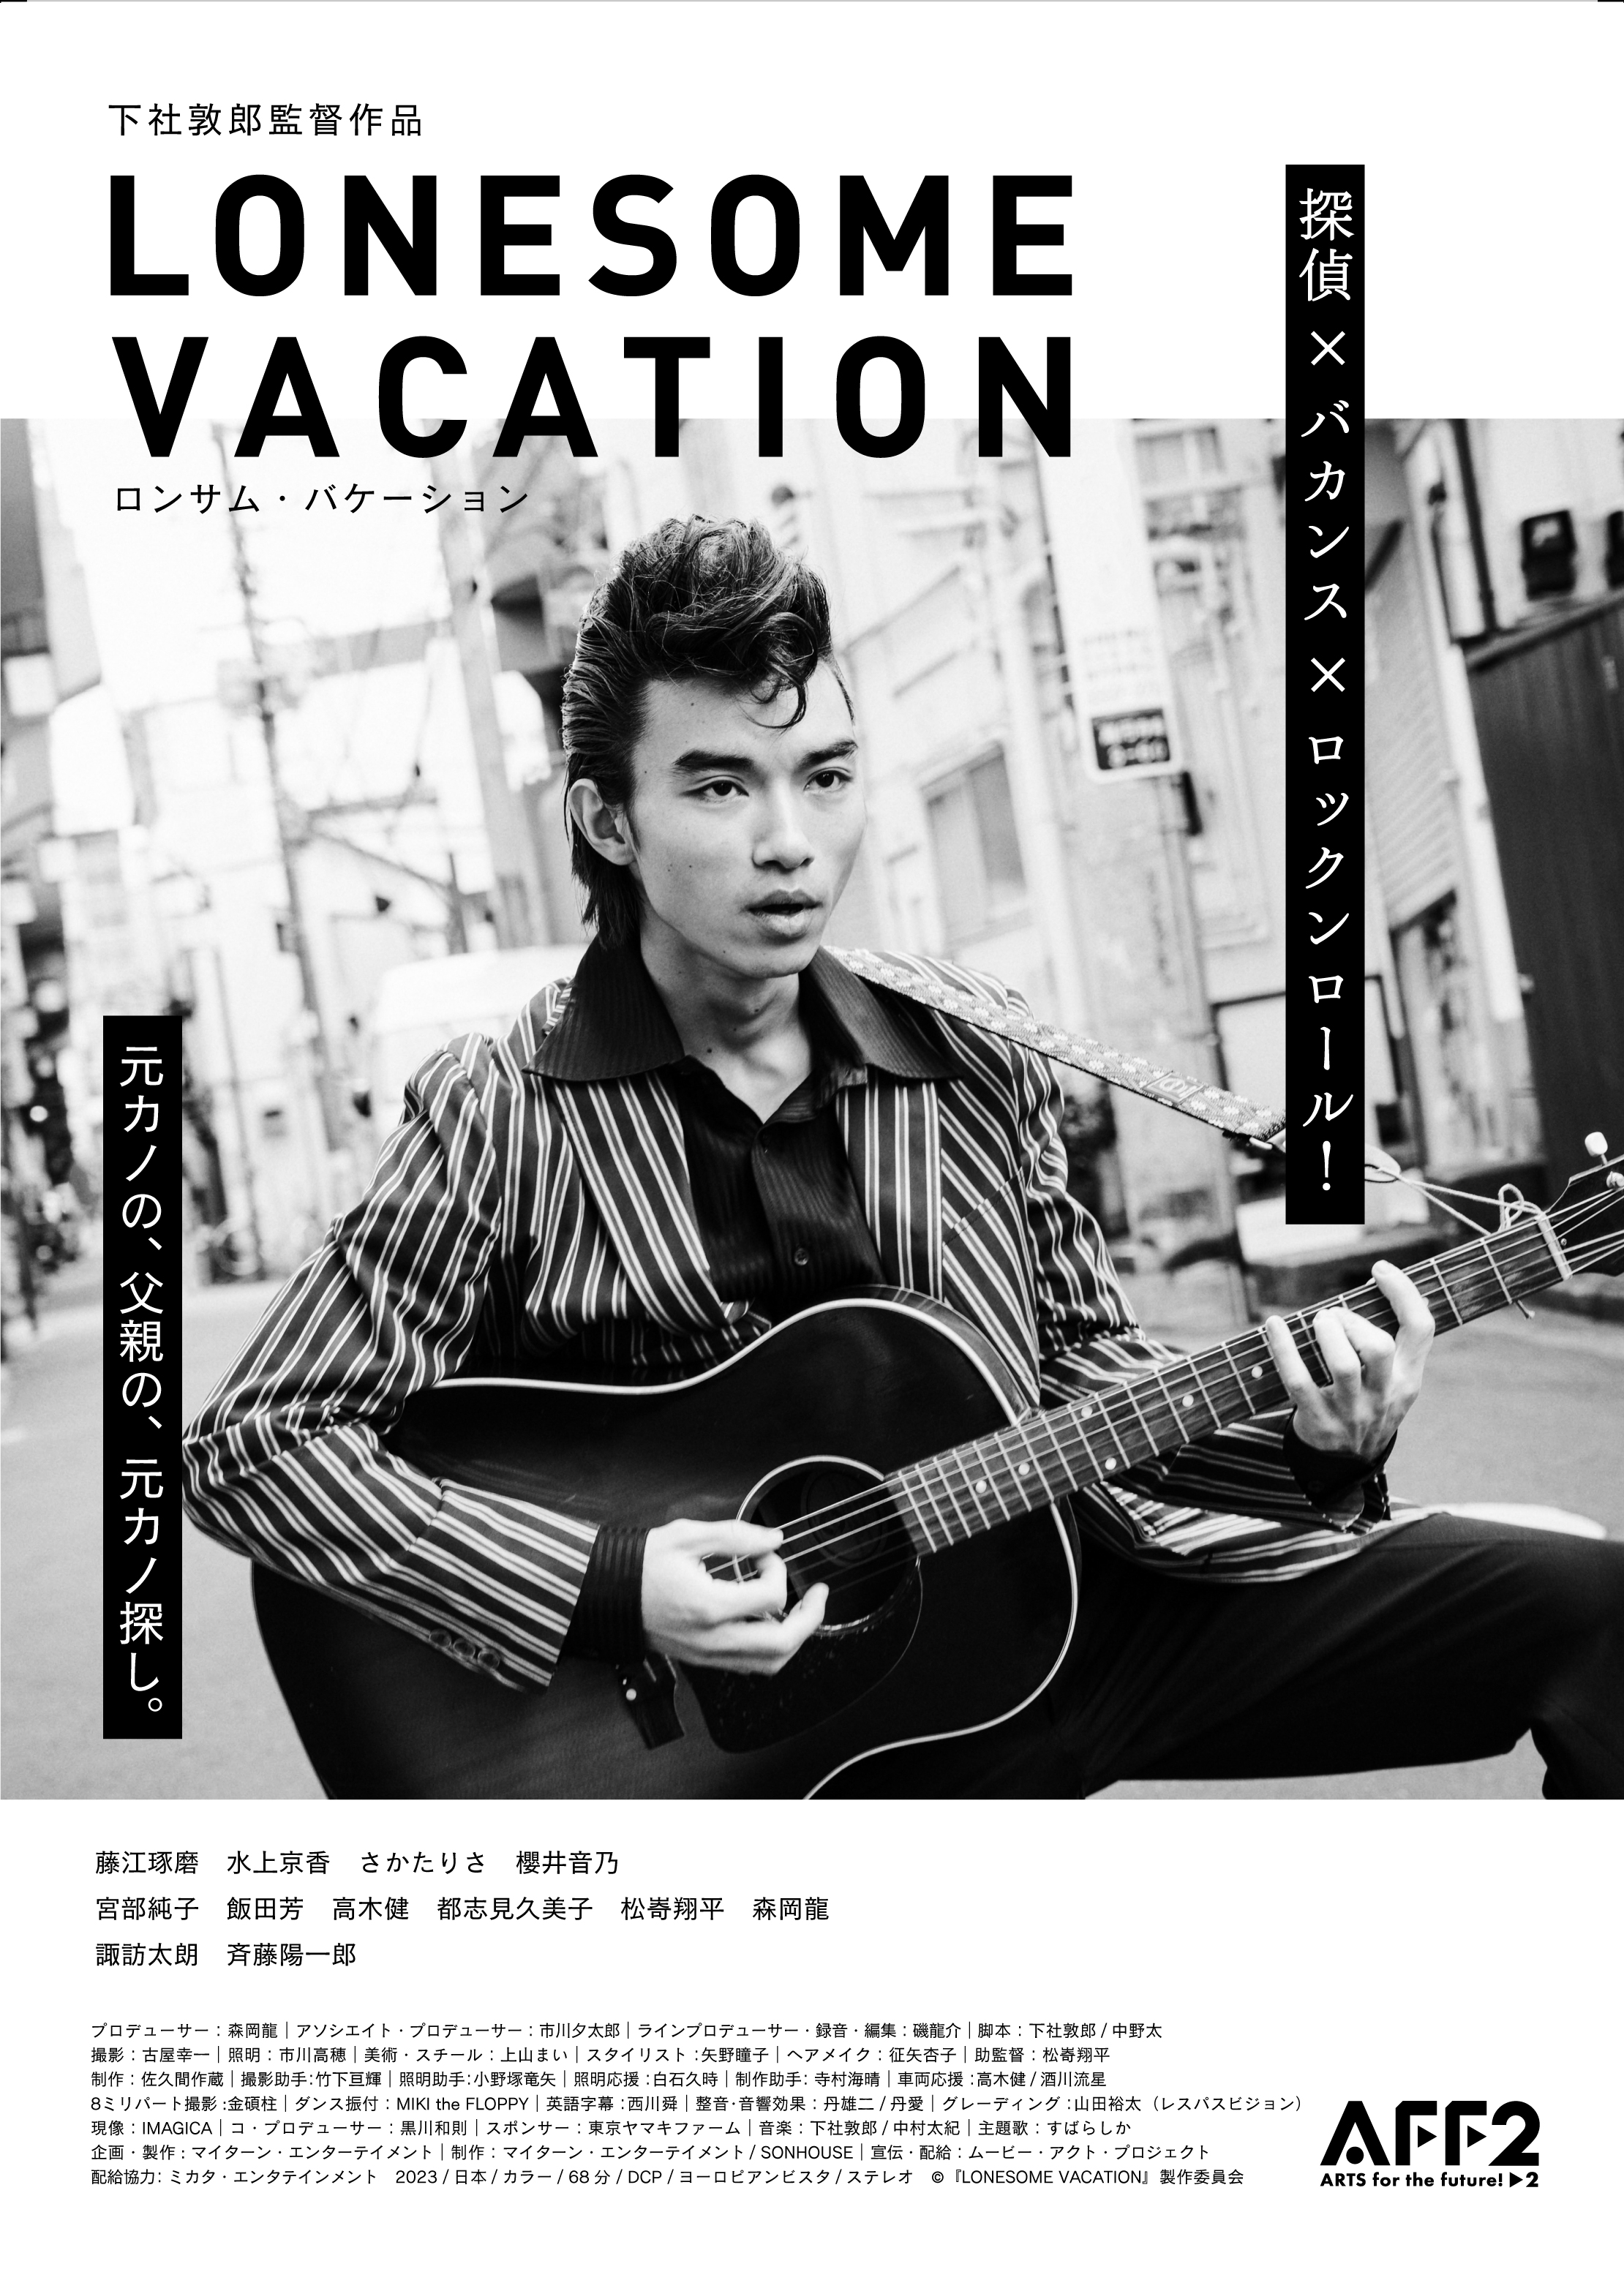 「LONESOME VACATION」